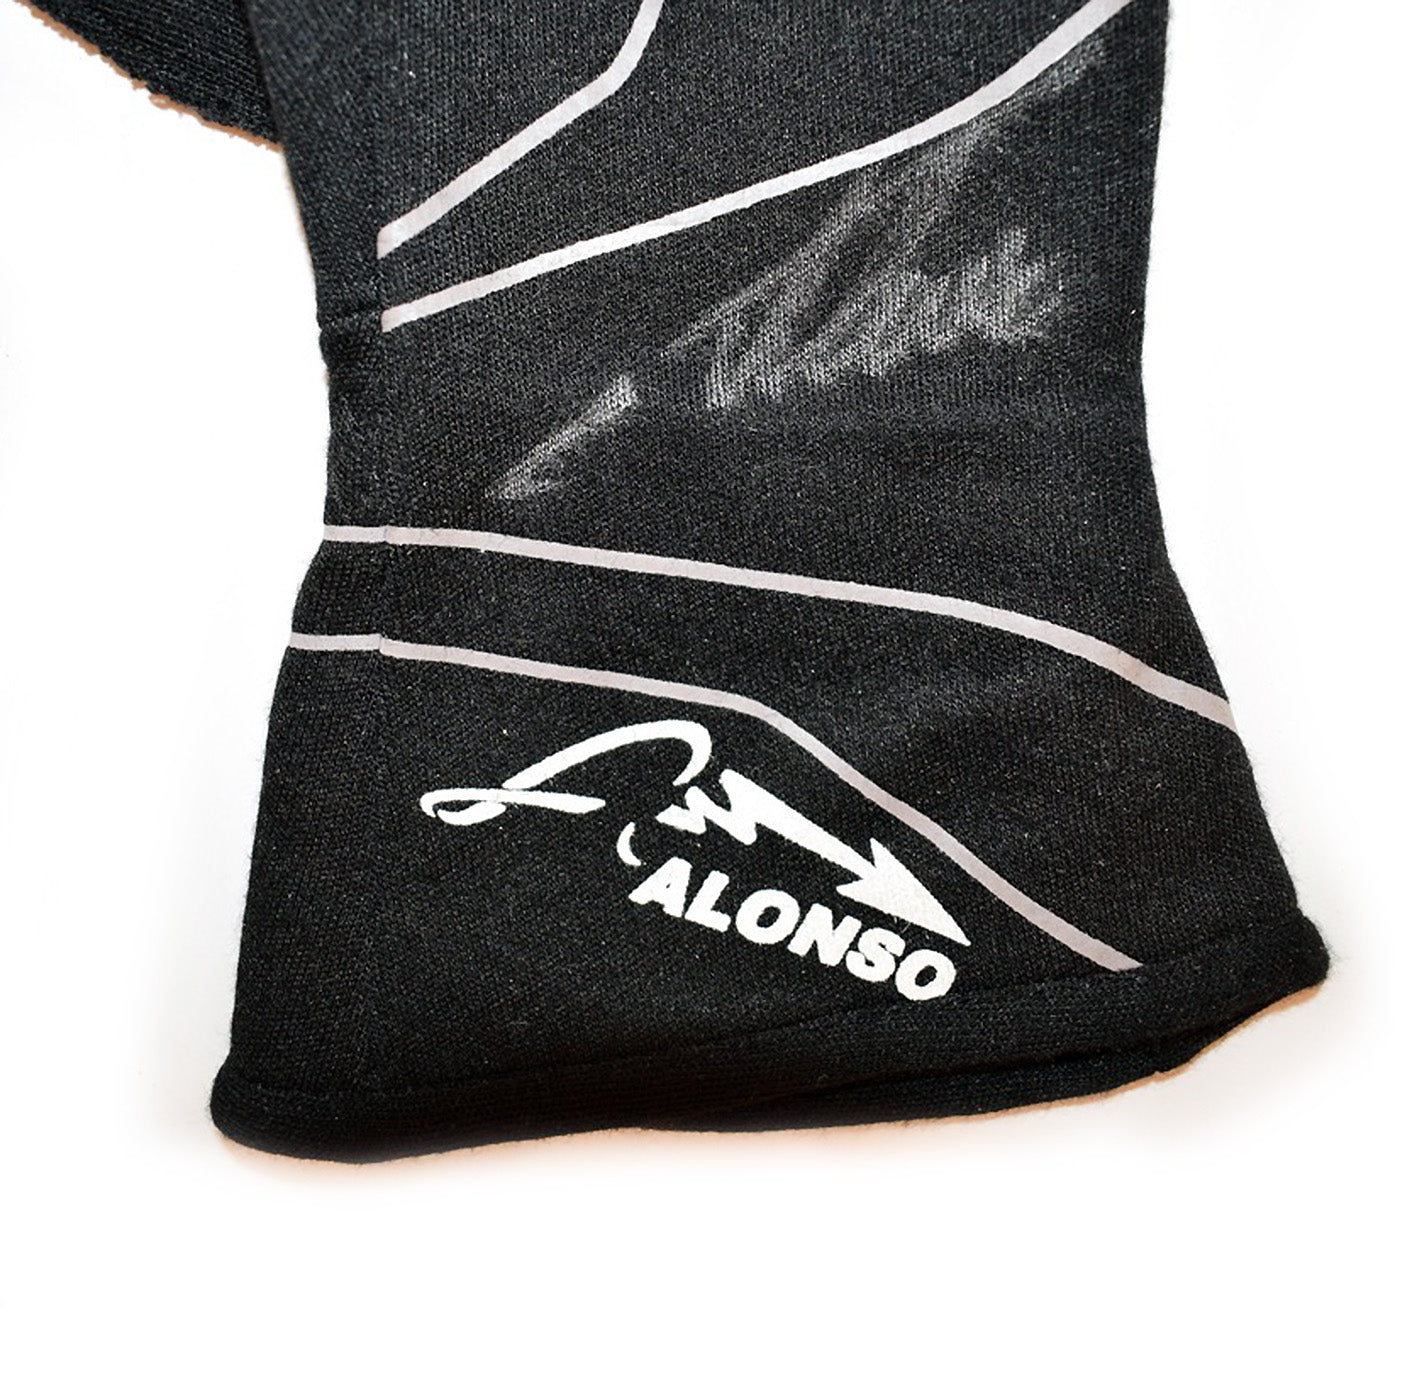 2017 Fernando Alonso Autographed Race Used McLaren F1 Gloves and Boots